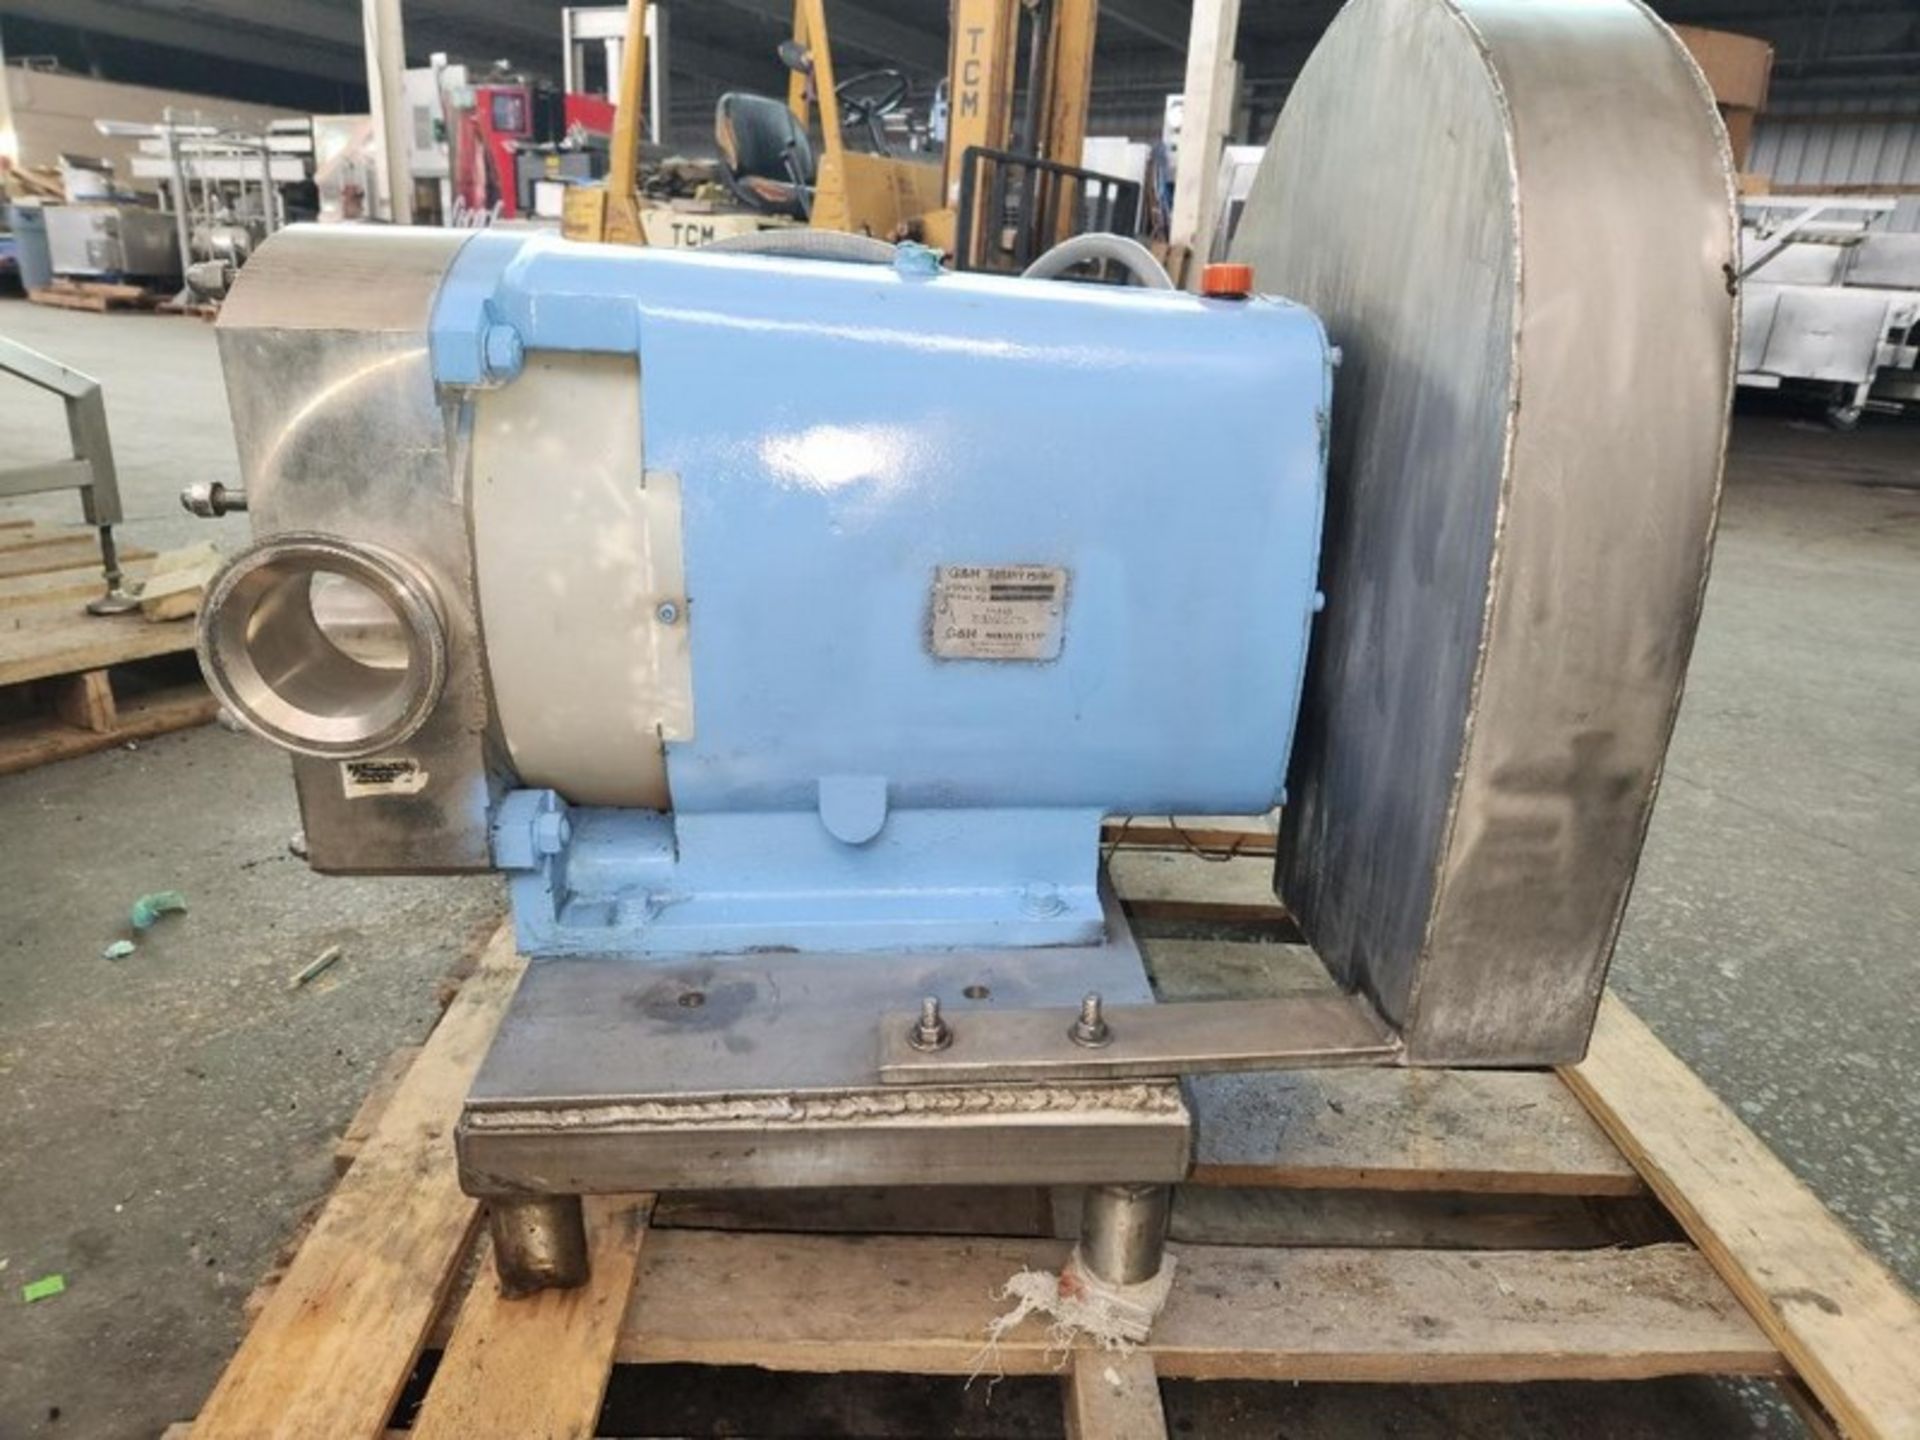 G & H (Alfa Laval) 7.5 hp 4" S/S Sanitary Positive Displacement Pump, Model 822, S/N 95-8-50174 with - Image 7 of 15